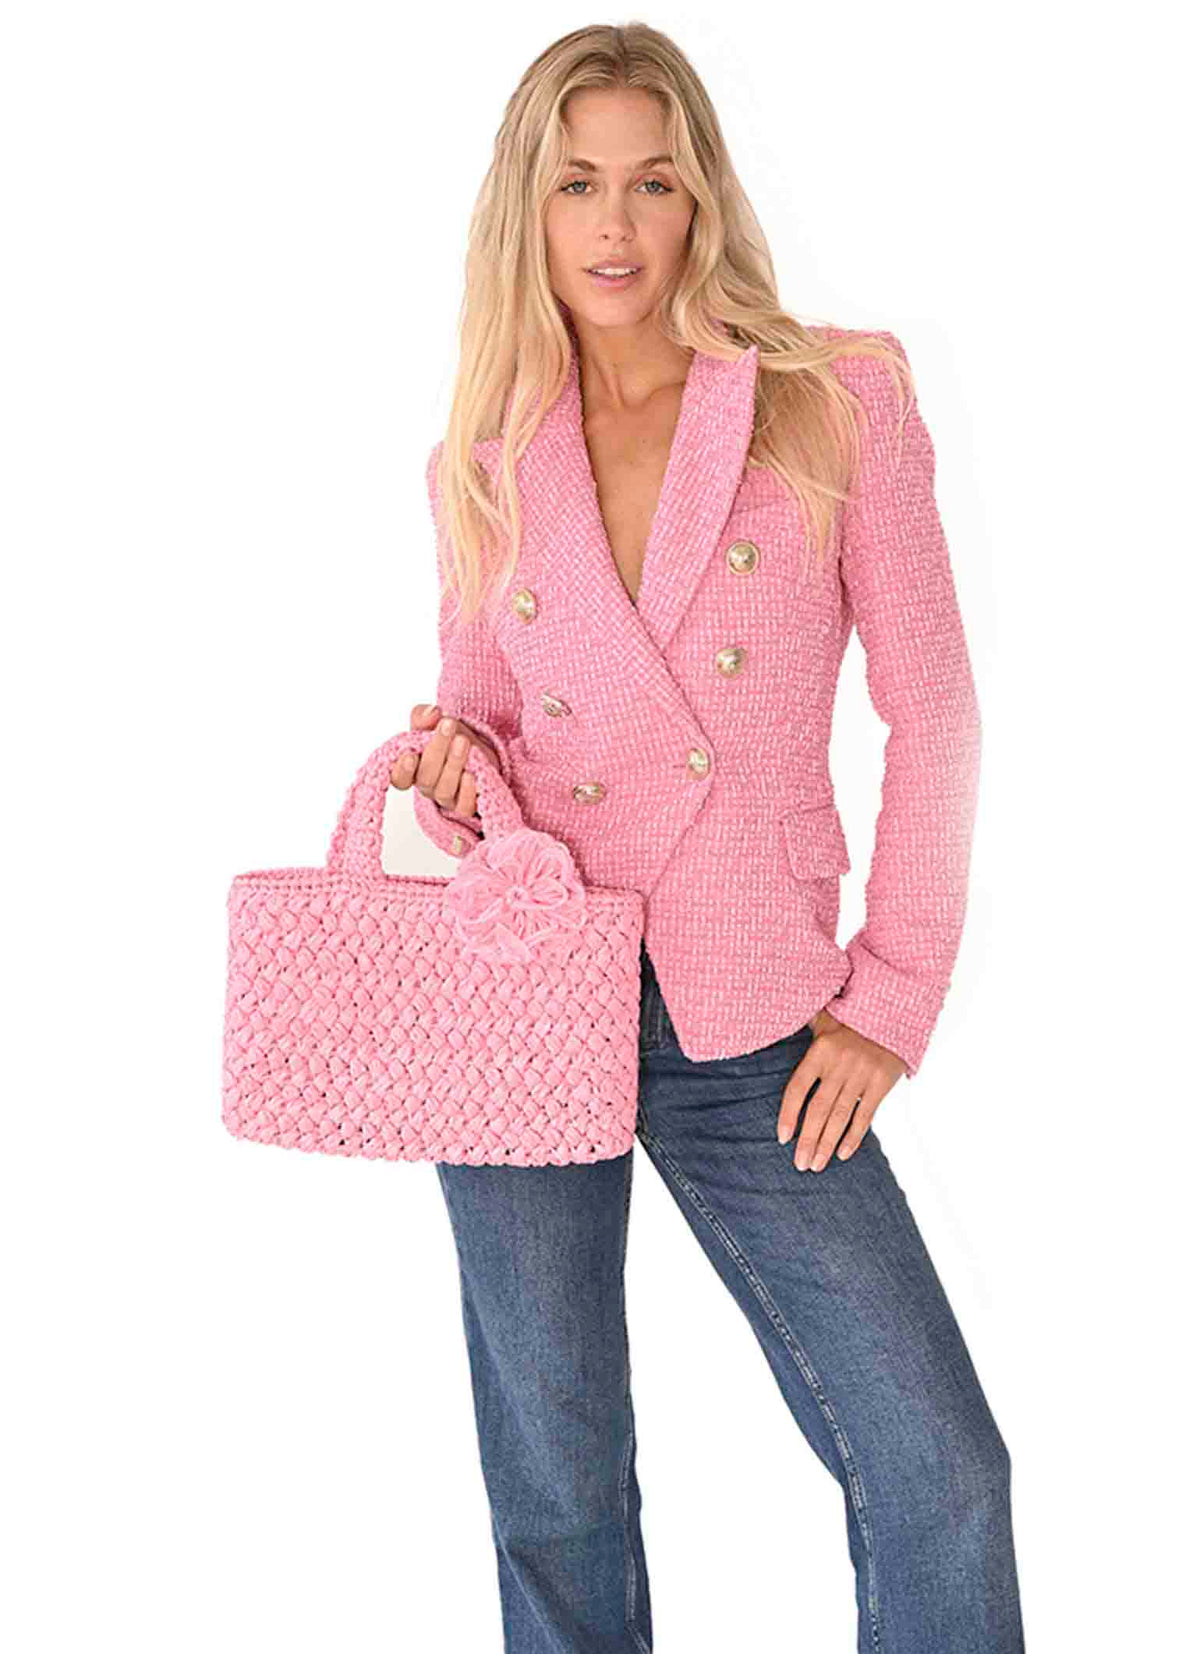 Women carries Baby pink Positano Raffia Small Bag perfect for beach and shopping lovers made in Italy from Carmen Sol